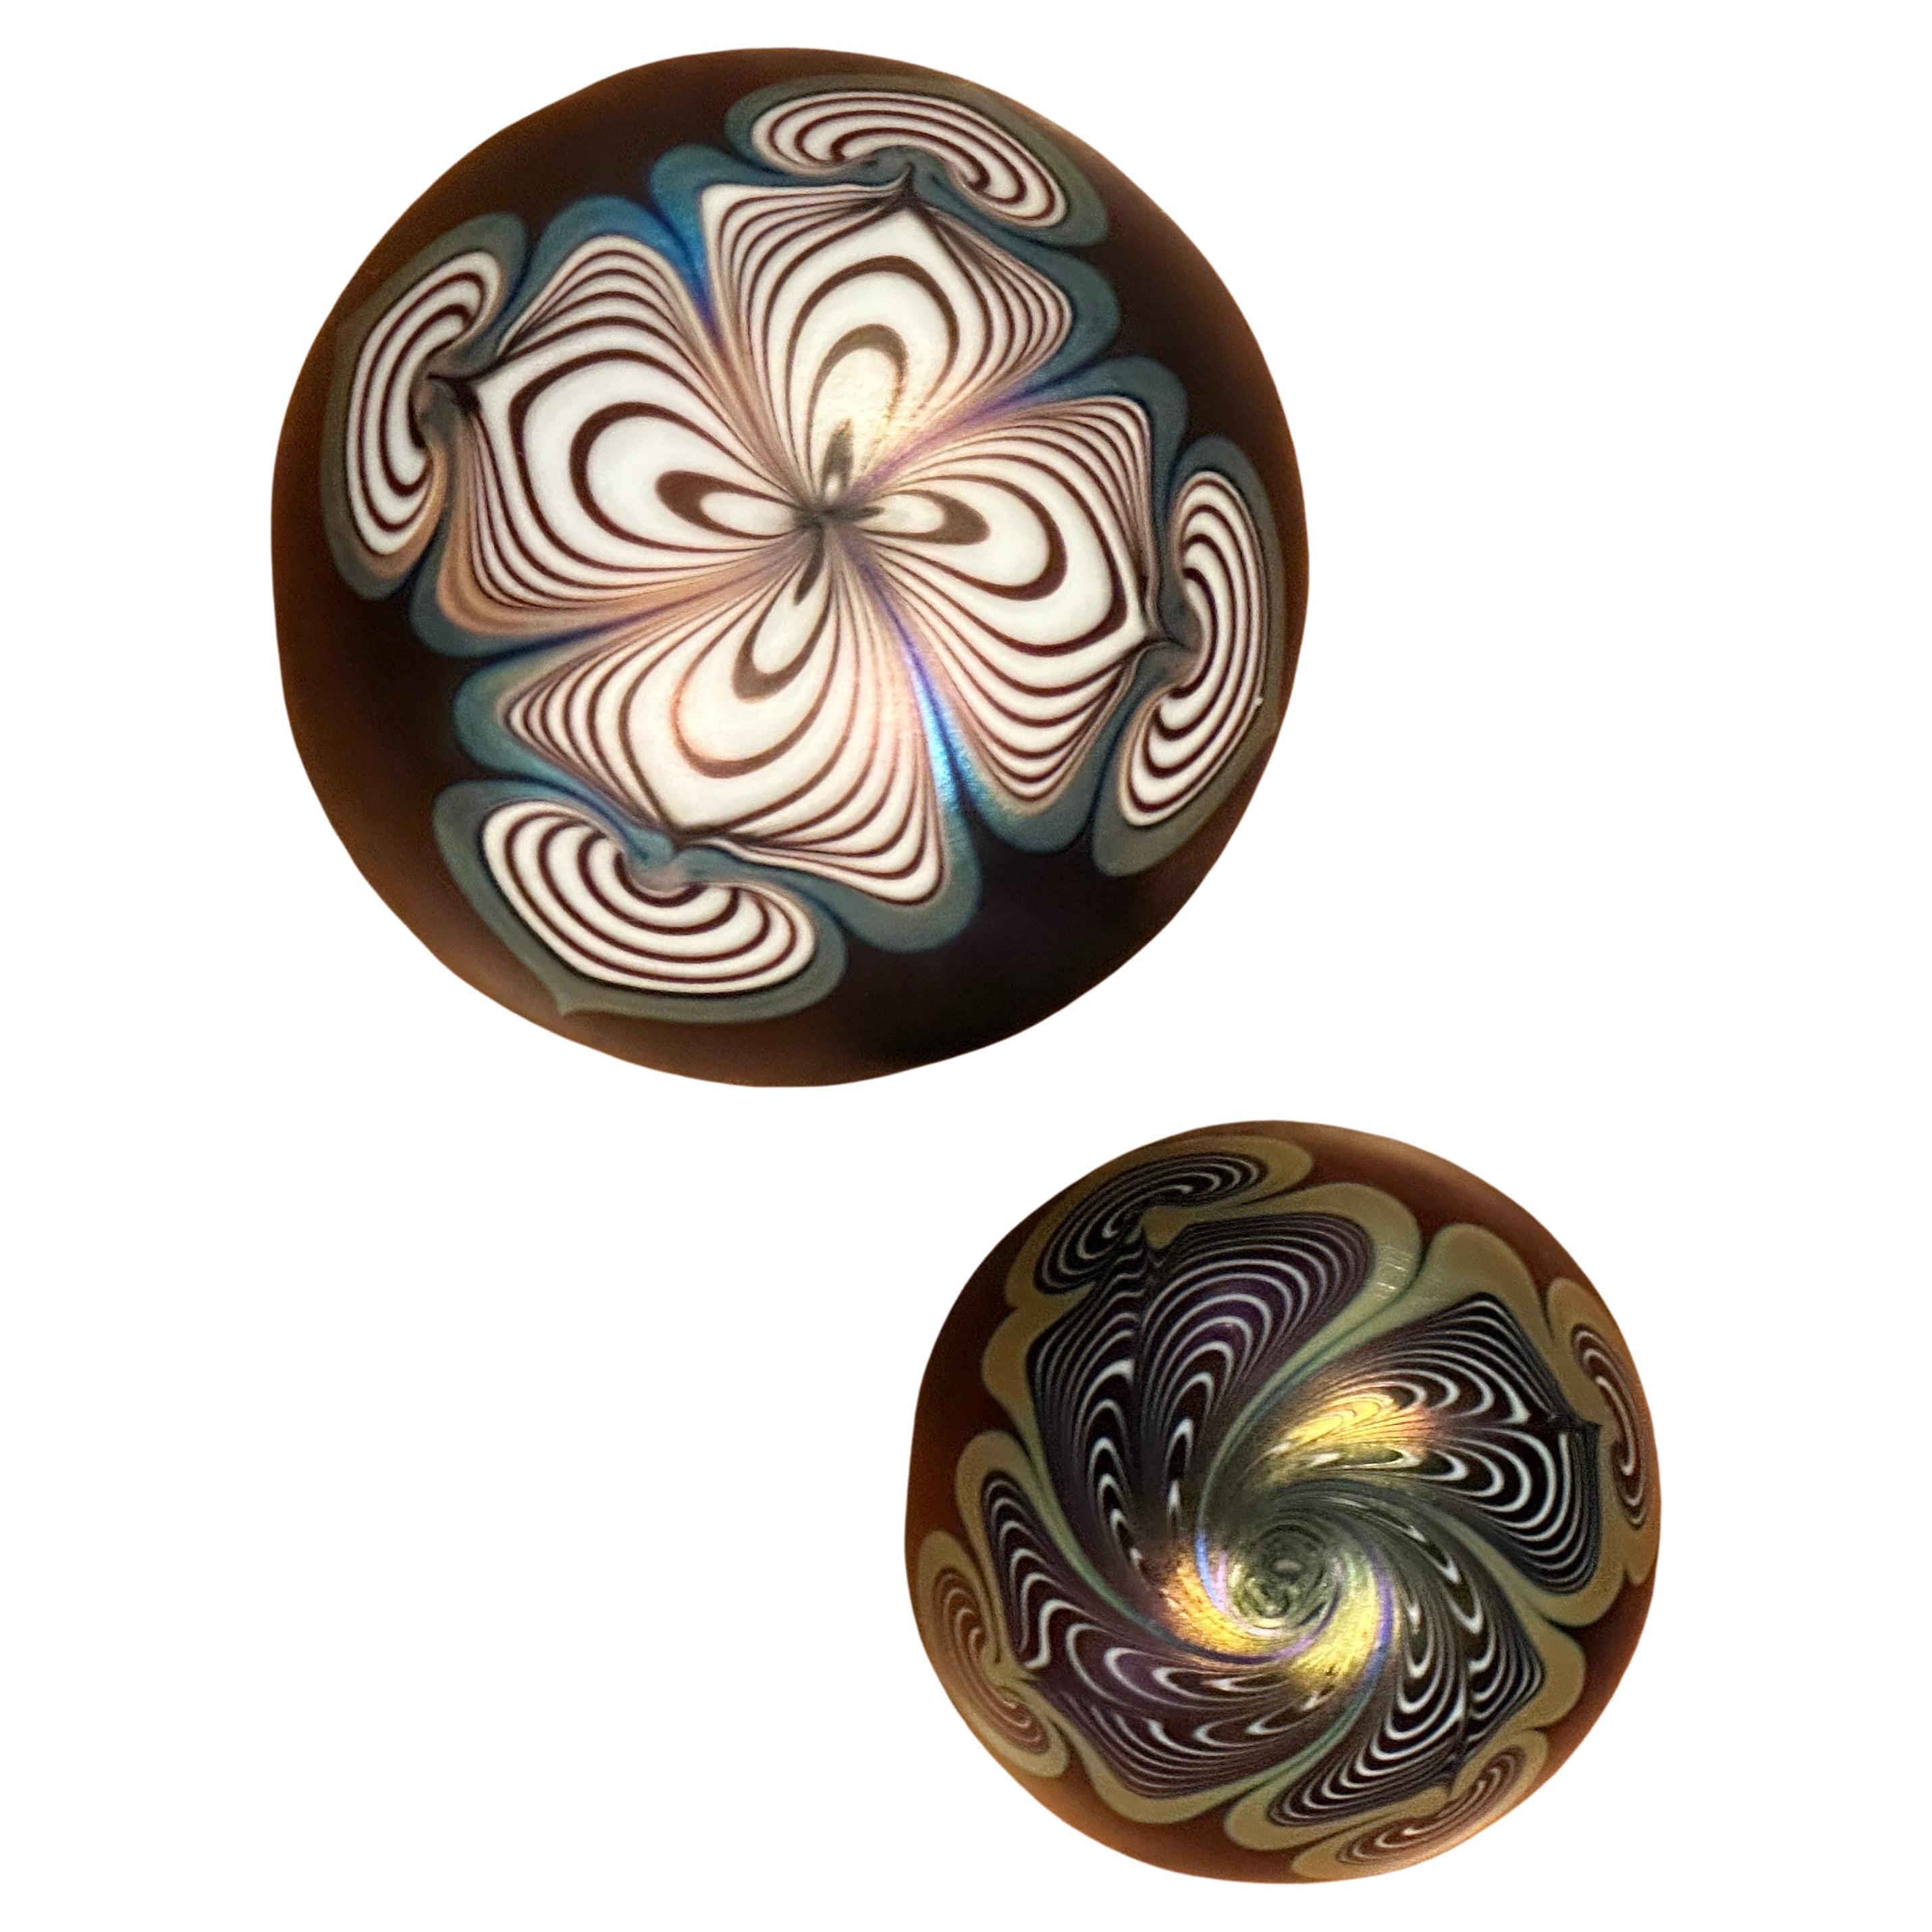 Spectacular pair of iridescent art glass paperweights by Stuart Abelman, circa 1995.  The pieces are in very good vintage condition with no chips or cracks and measures 3.25